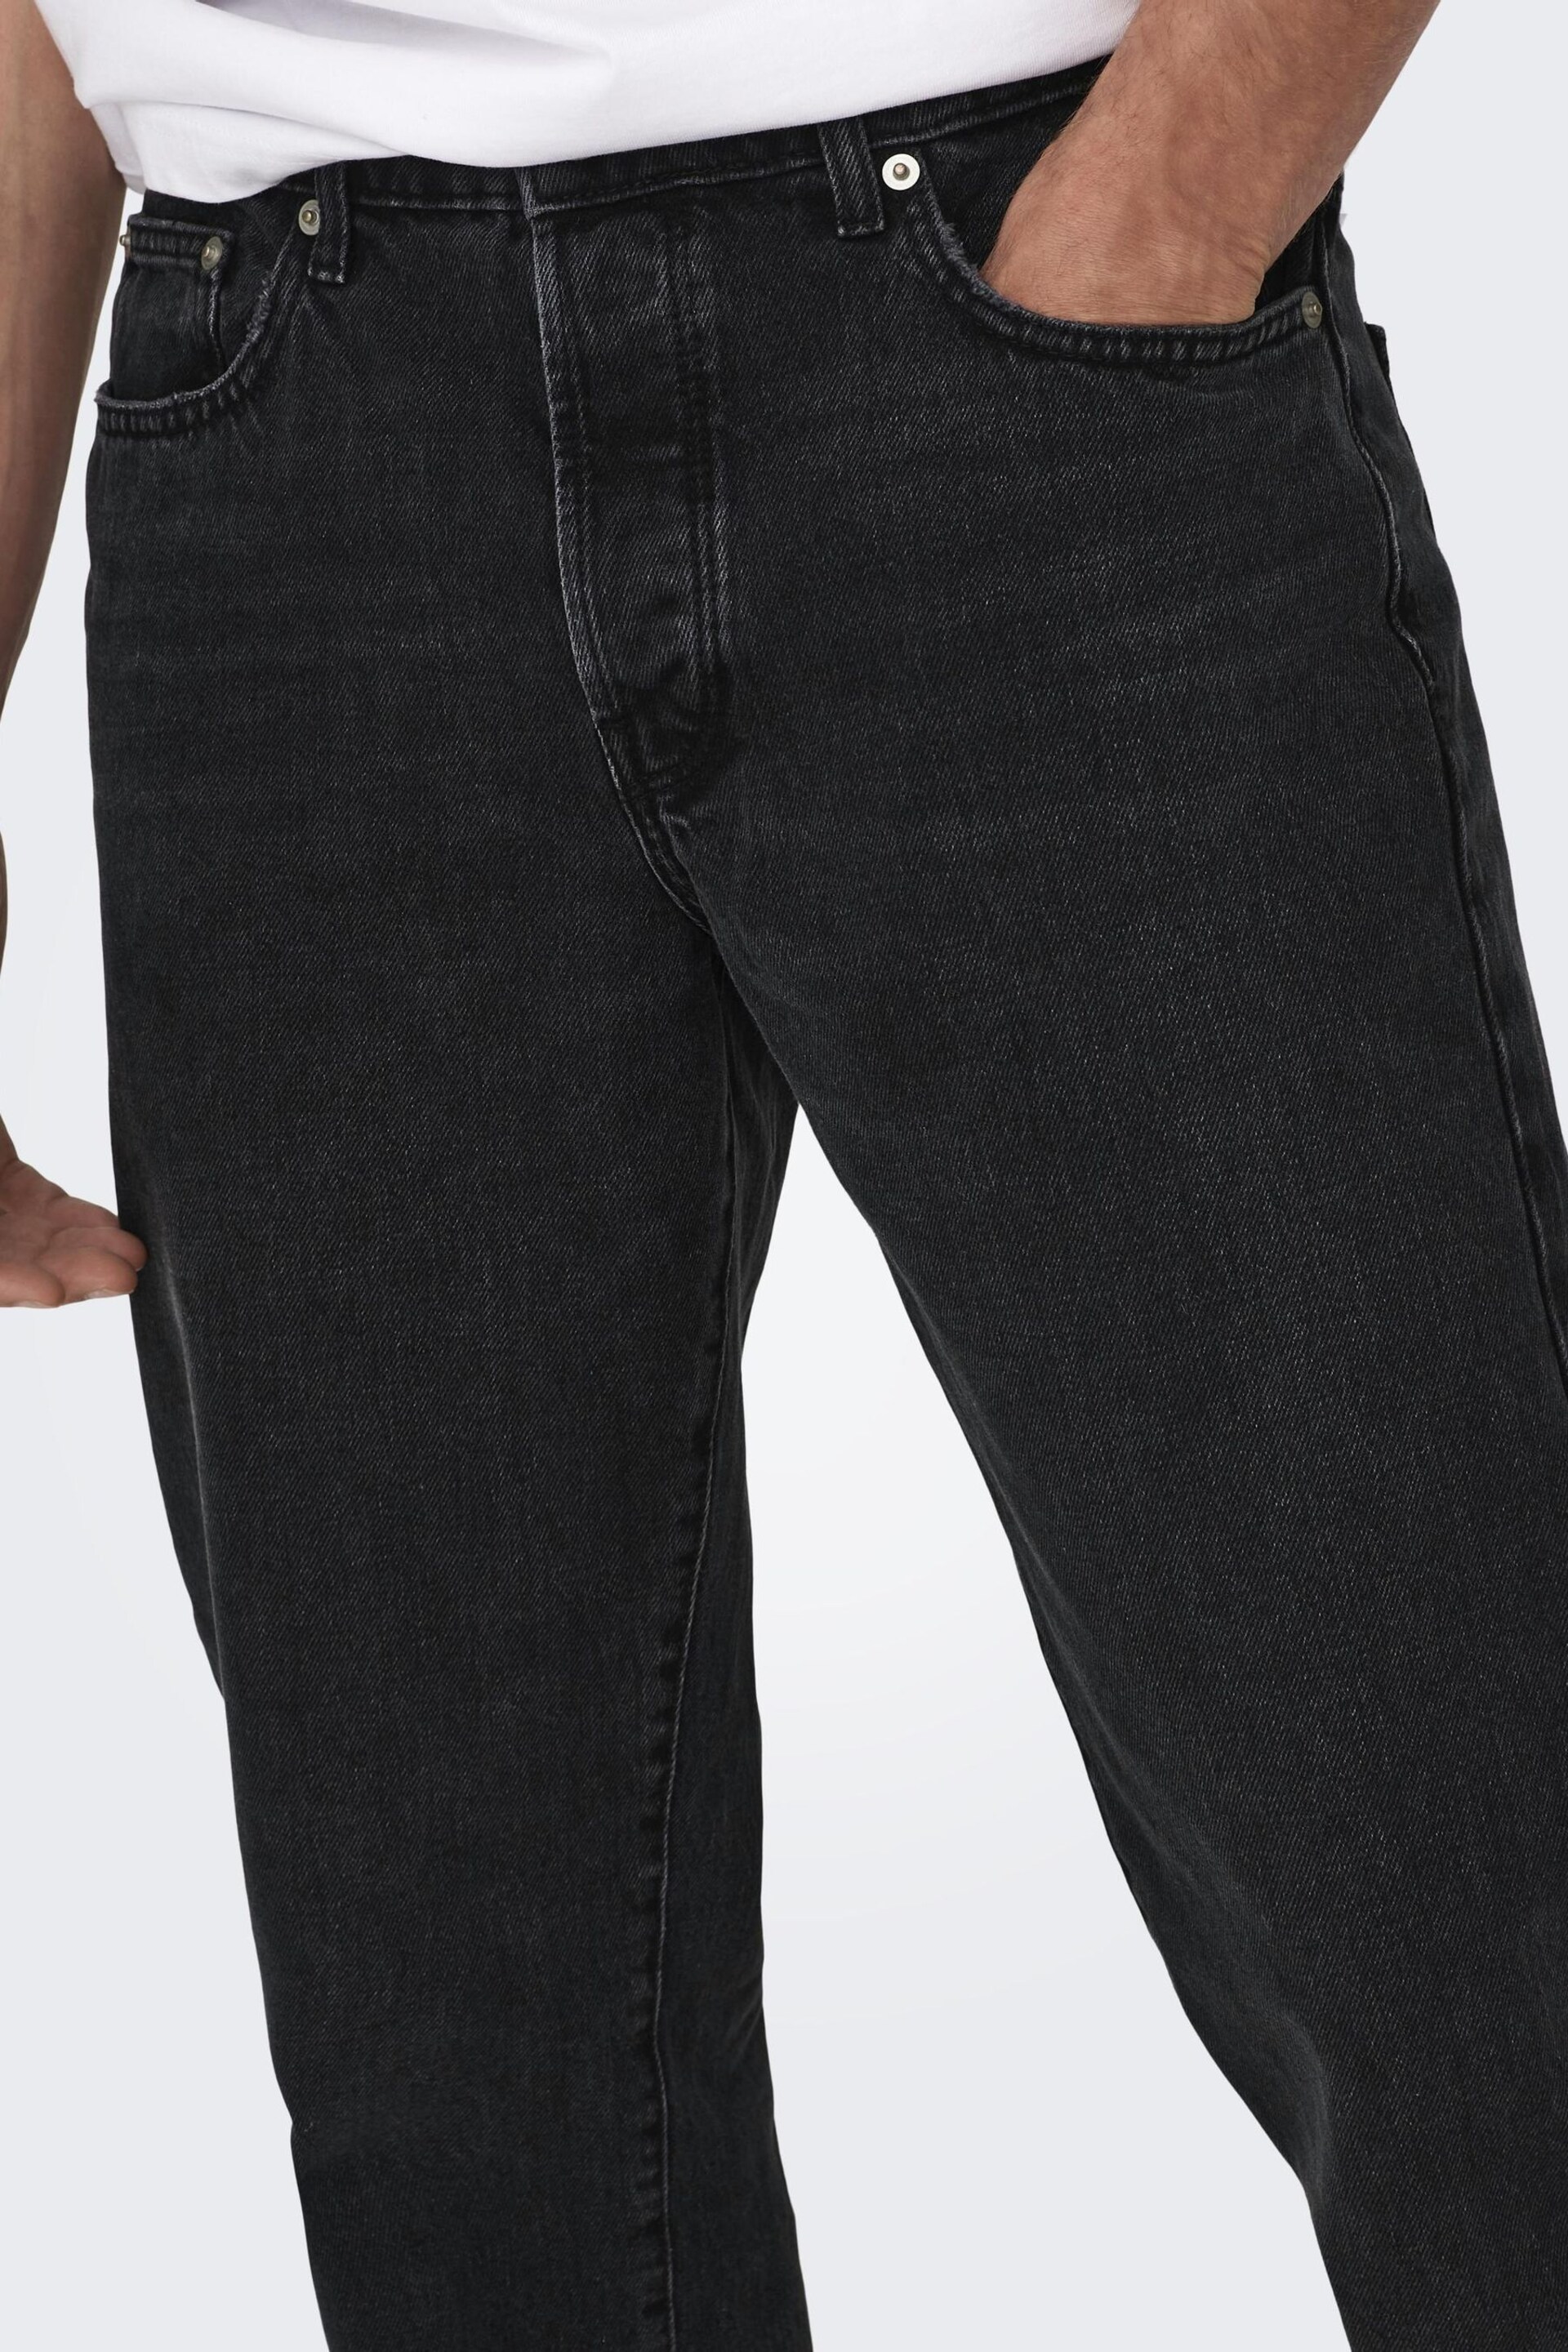 Only & Sons Black Straight Leg Jeans - Image 4 of 6